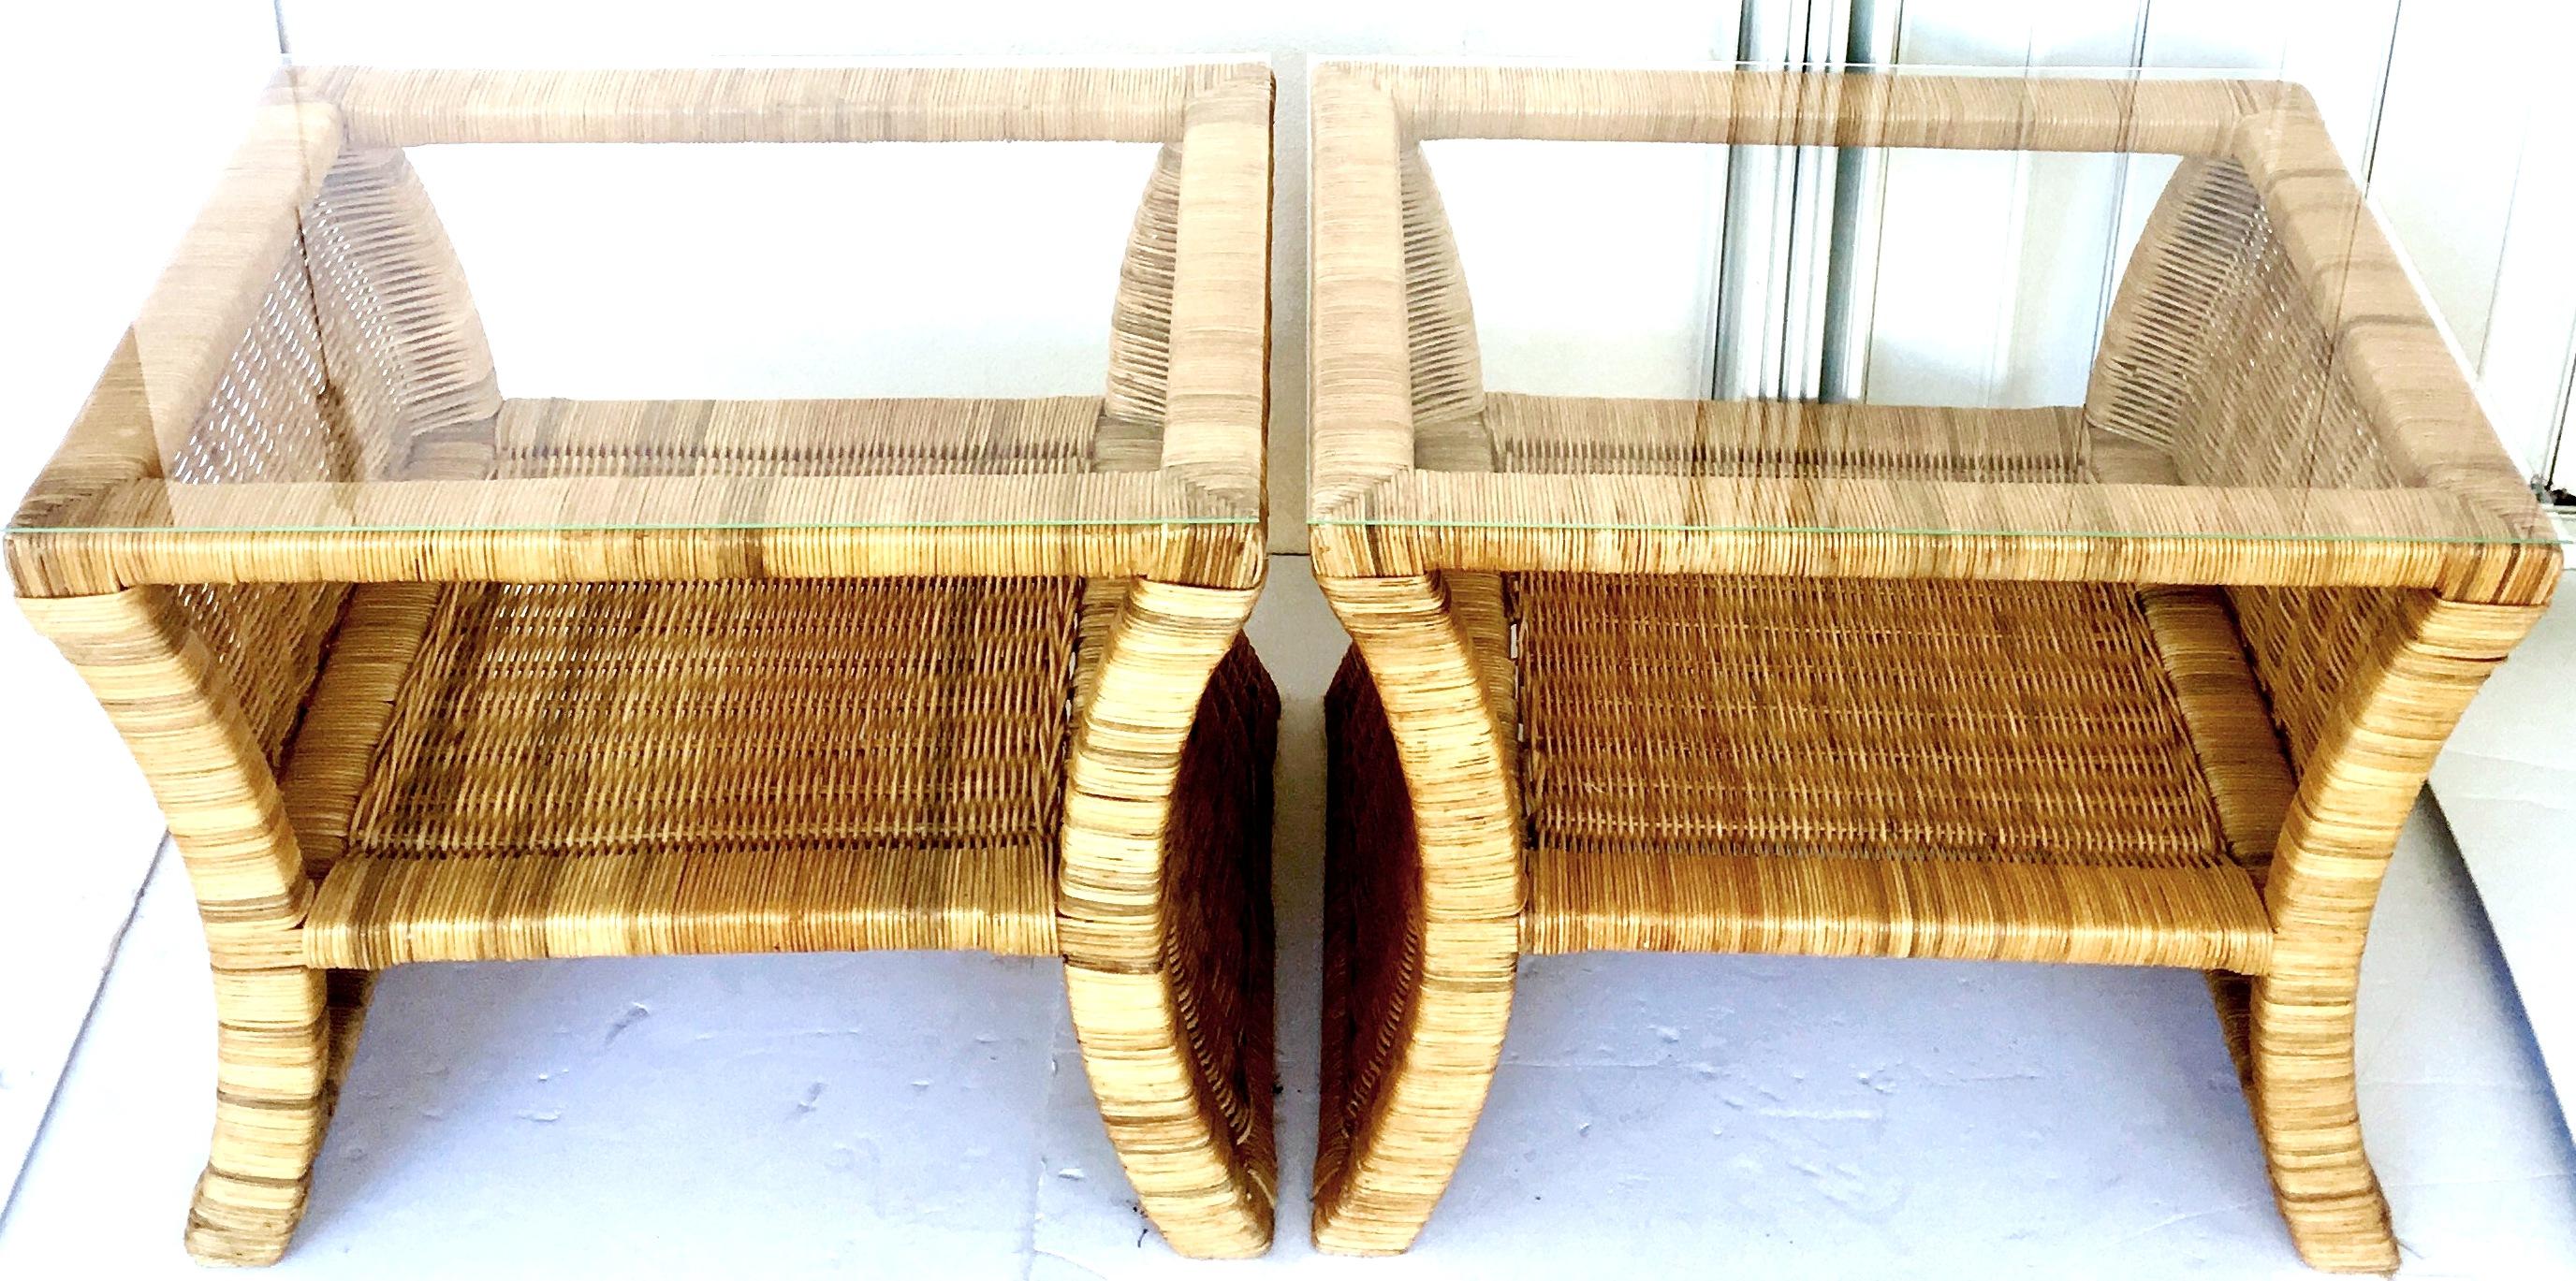 wicker and glass side table